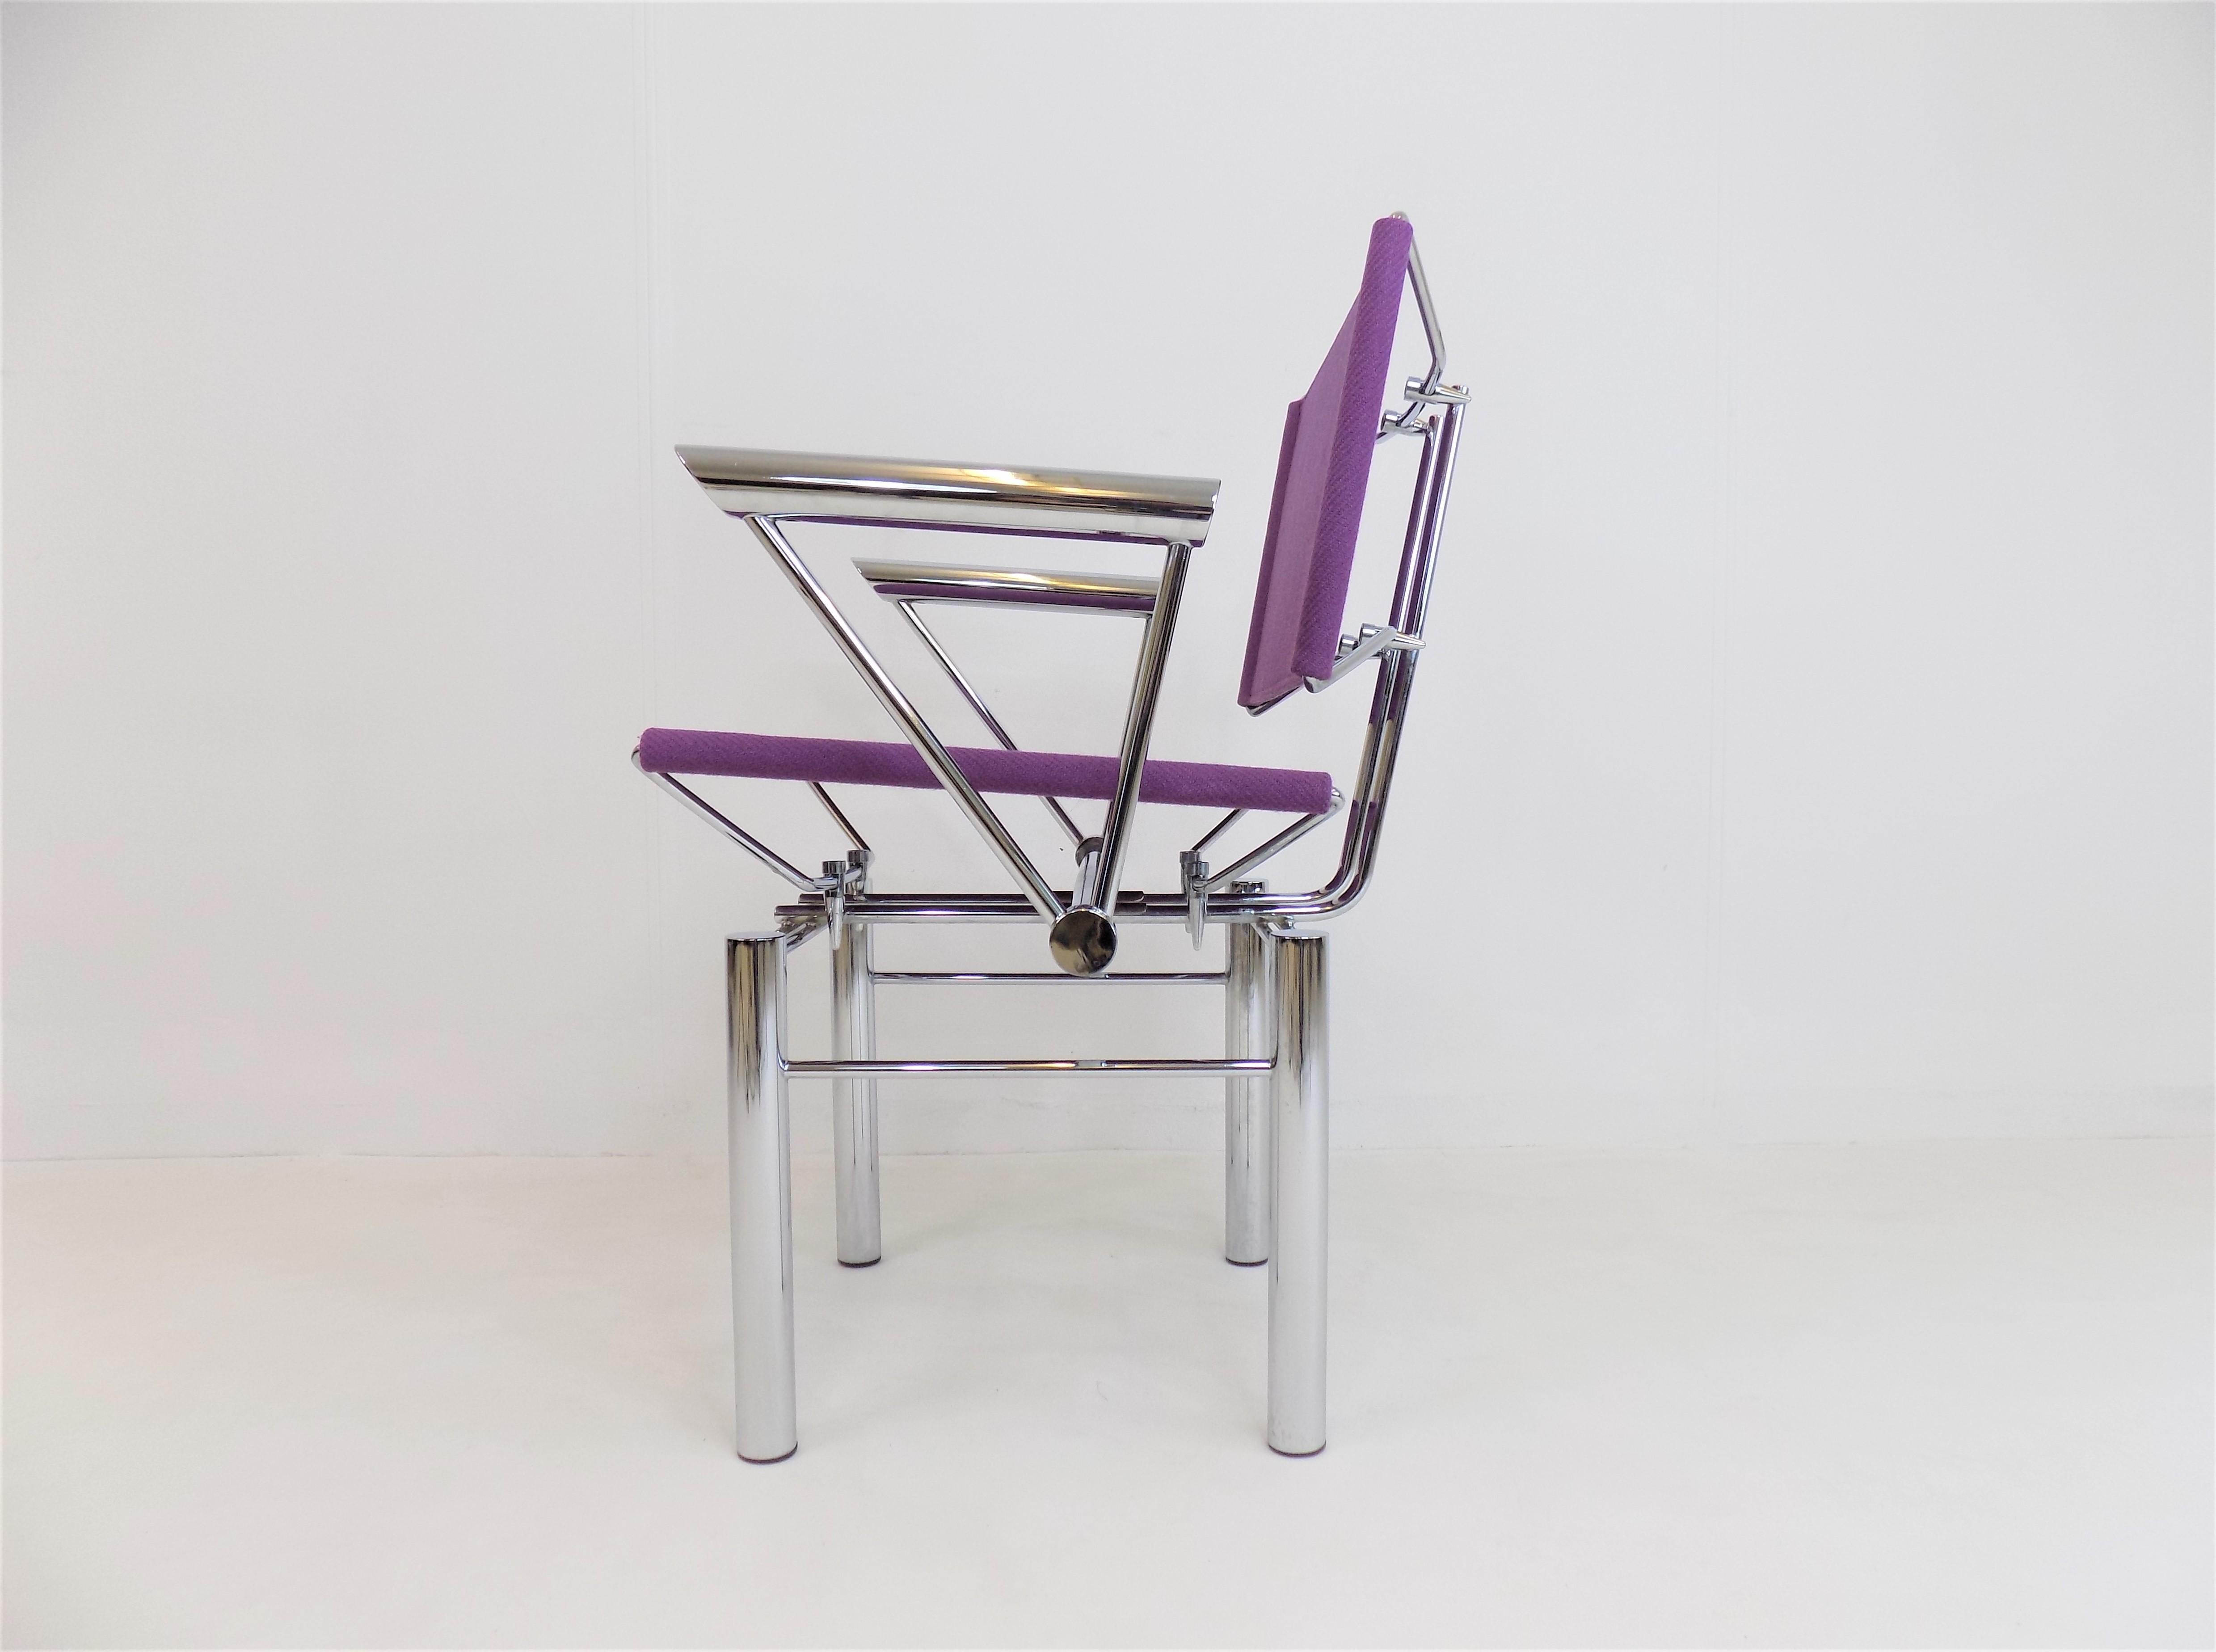 This futuristic-looking Kusch chair 8600 has a chrome-plated metal frame and a purple-colored fabric cover for the seat and backrest. The martial and at the same time airy looking chrome frame shows hardly any signs of wear. The fabric covering is